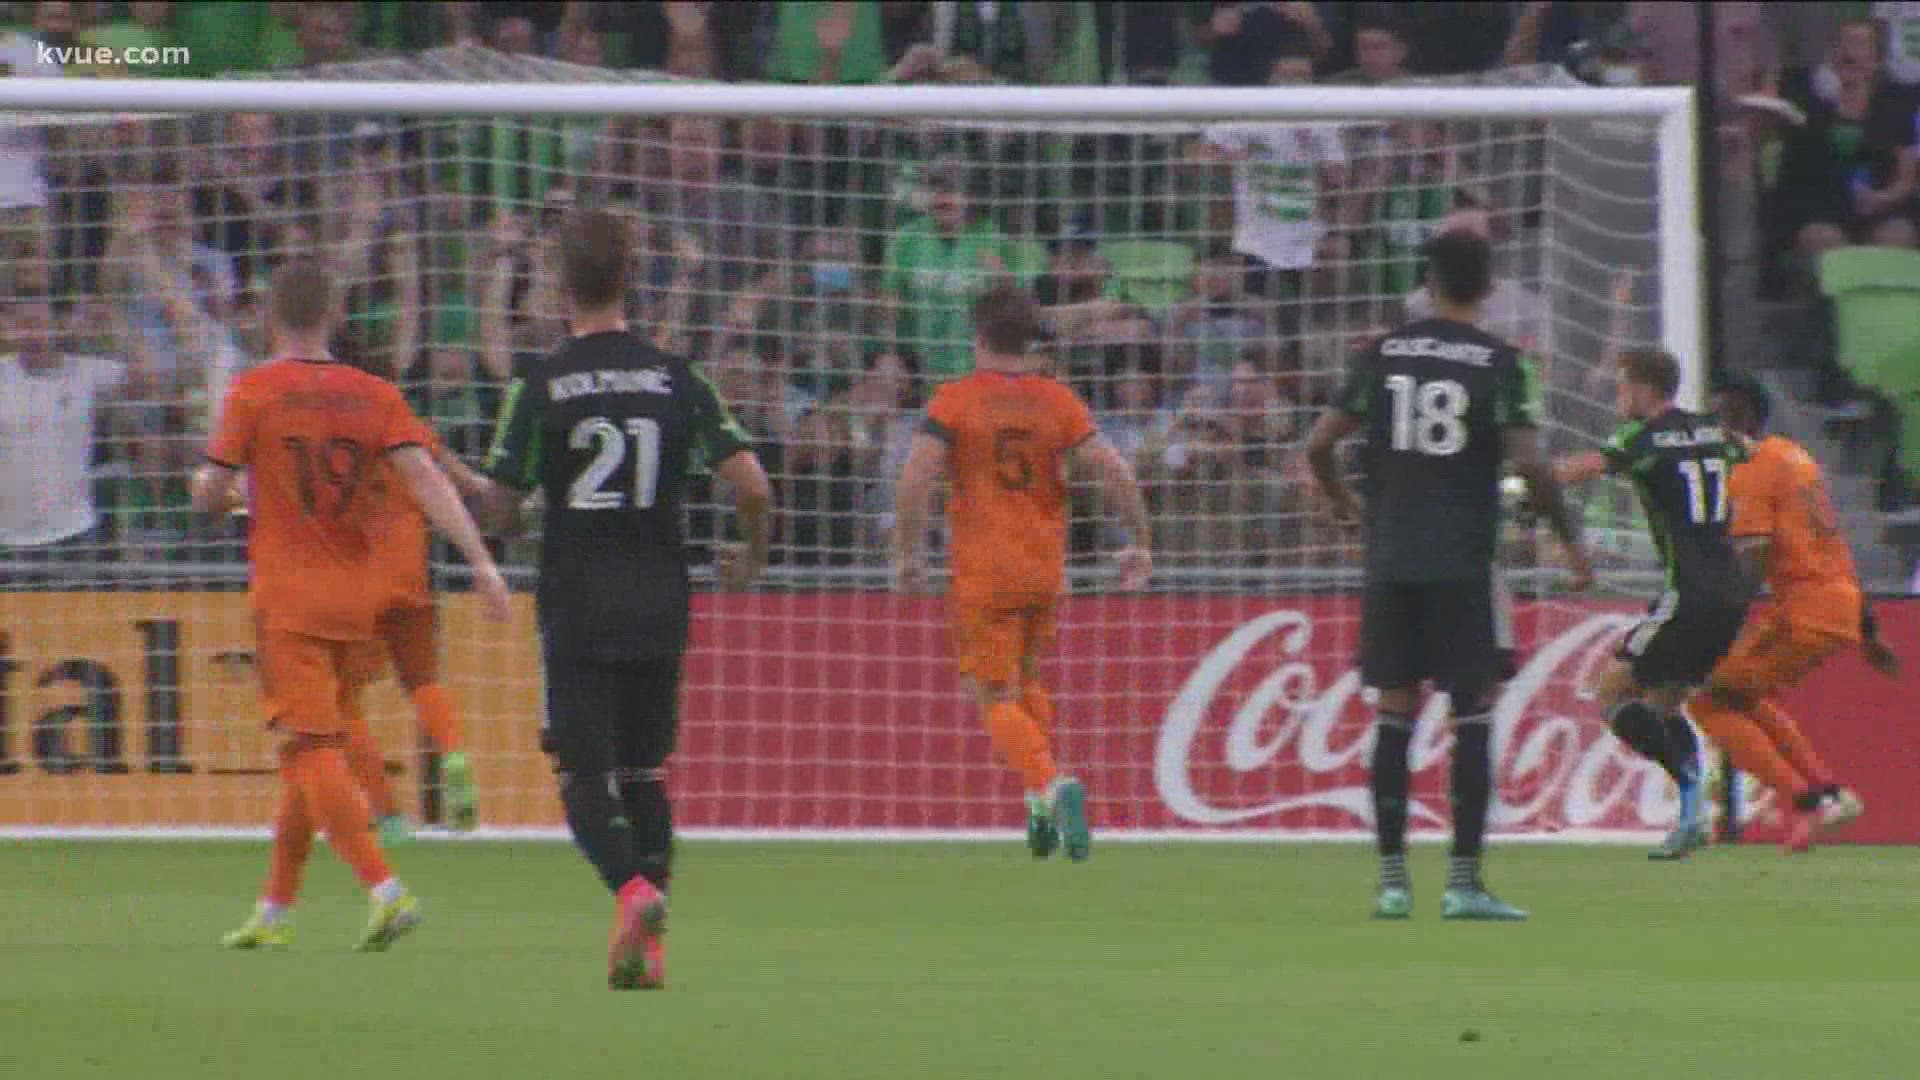 After three straight scoreless MLS games, Austin FC fans had their prayers answered in the team's first rivalry game against Houston Dynamo.